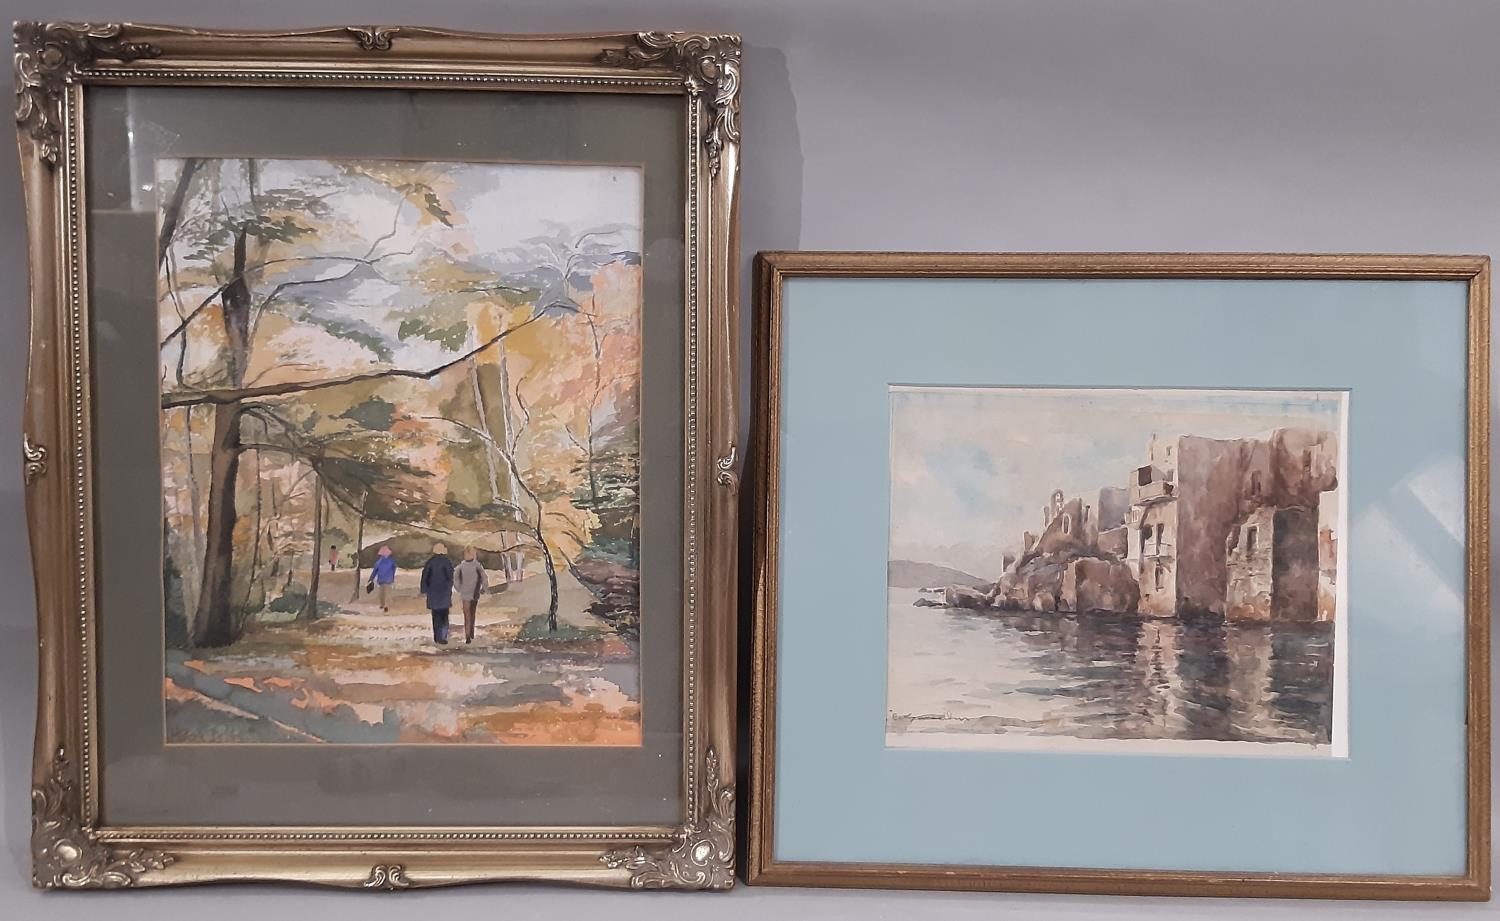 Two watercolours by different artists, both indistinctly signed - Buildings near water, and